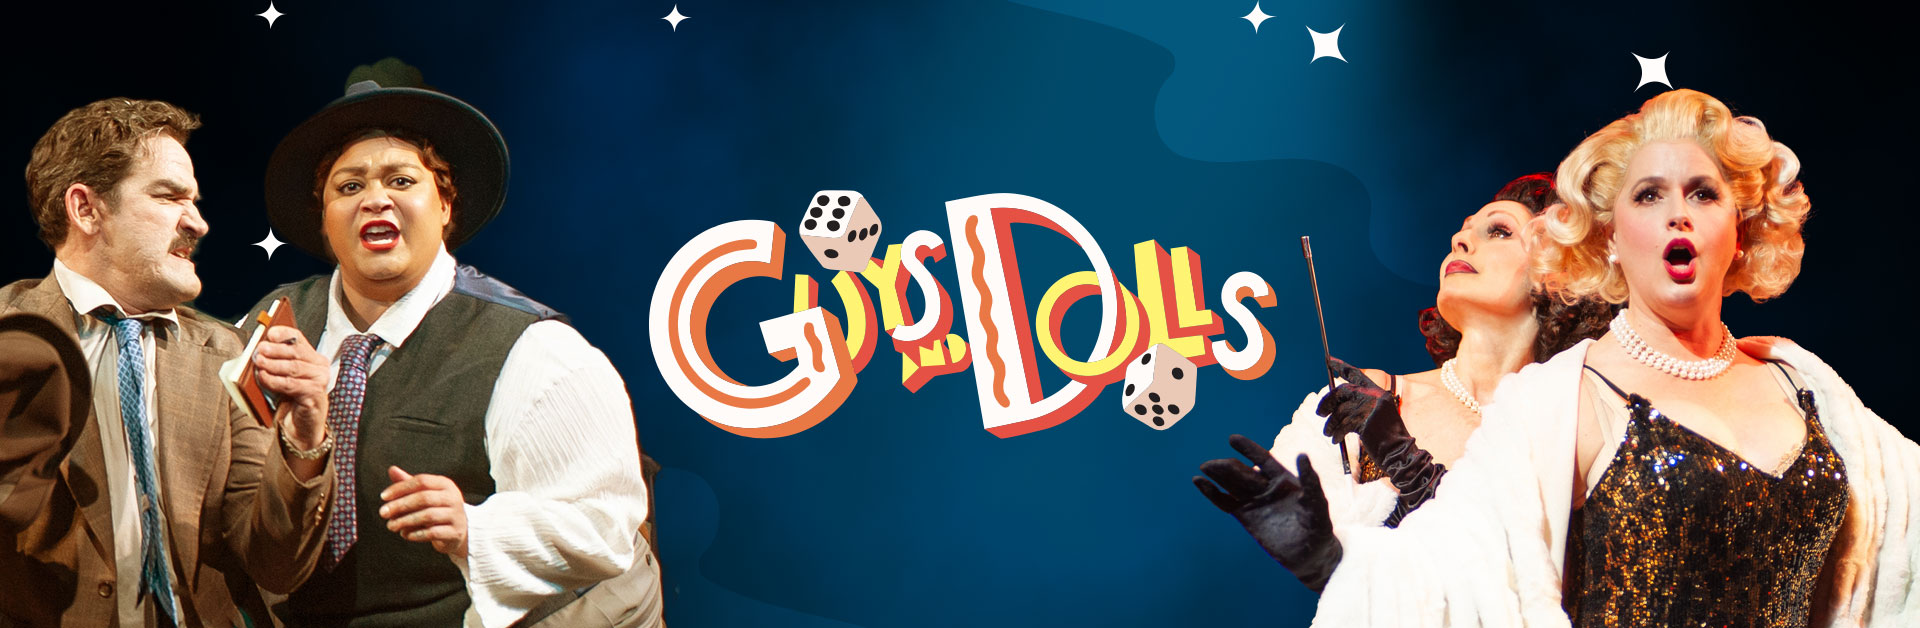 Guys and Dolls trailer